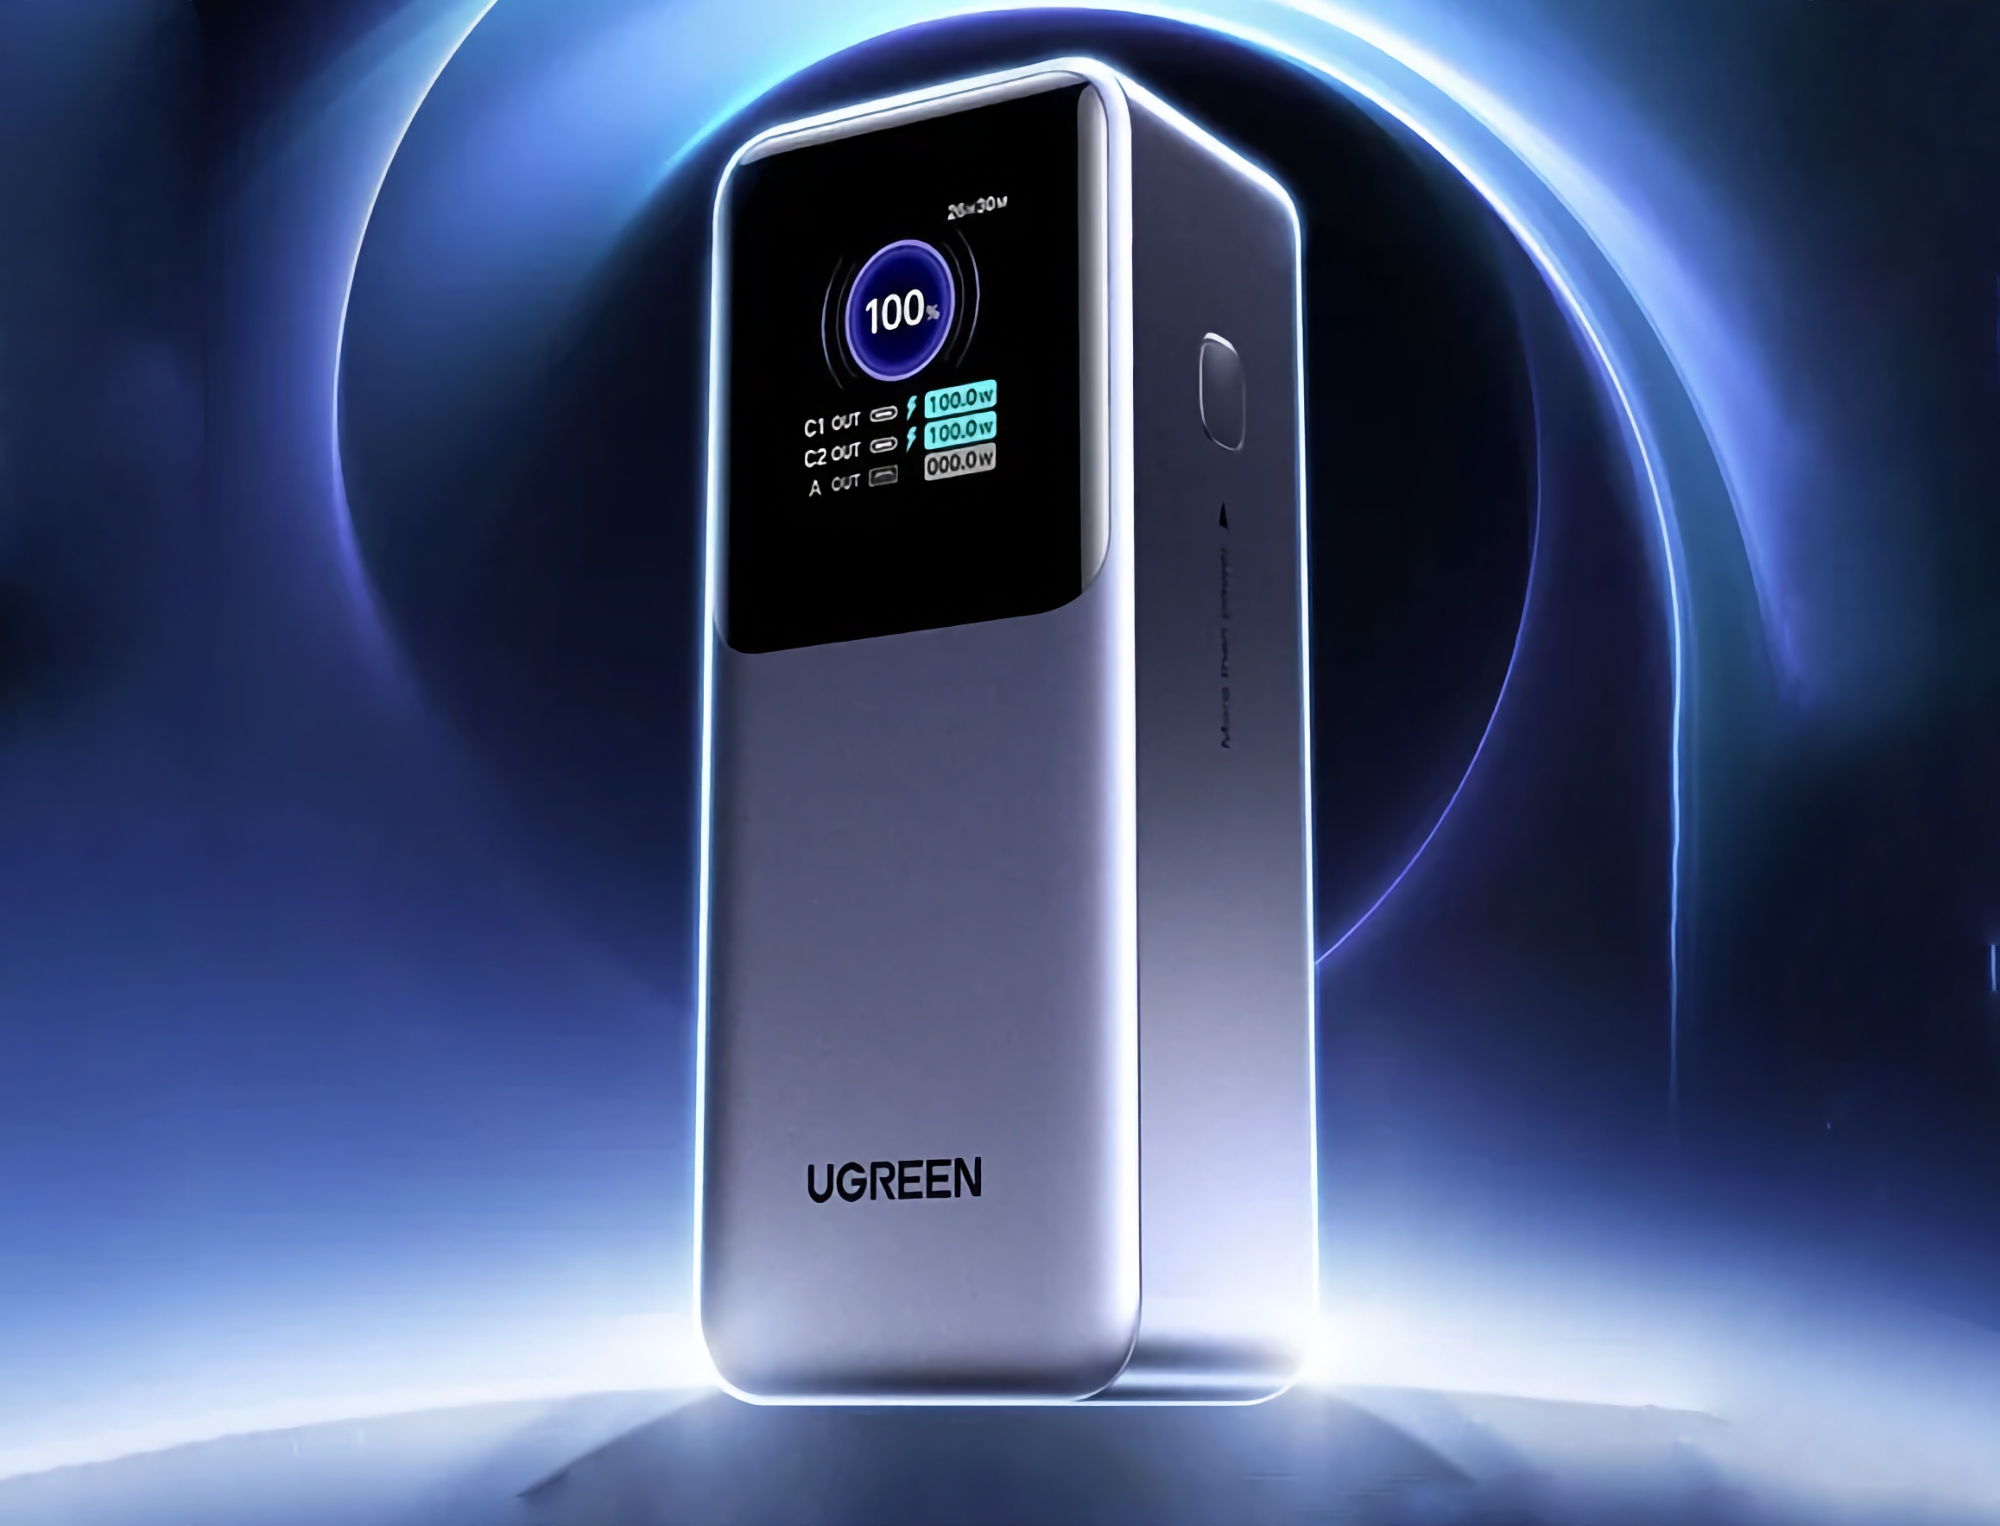 UGREEN Energy Pro: a battery with a 1.54-inch screen, 25,000 mAh and up to 65 watts of power for $48